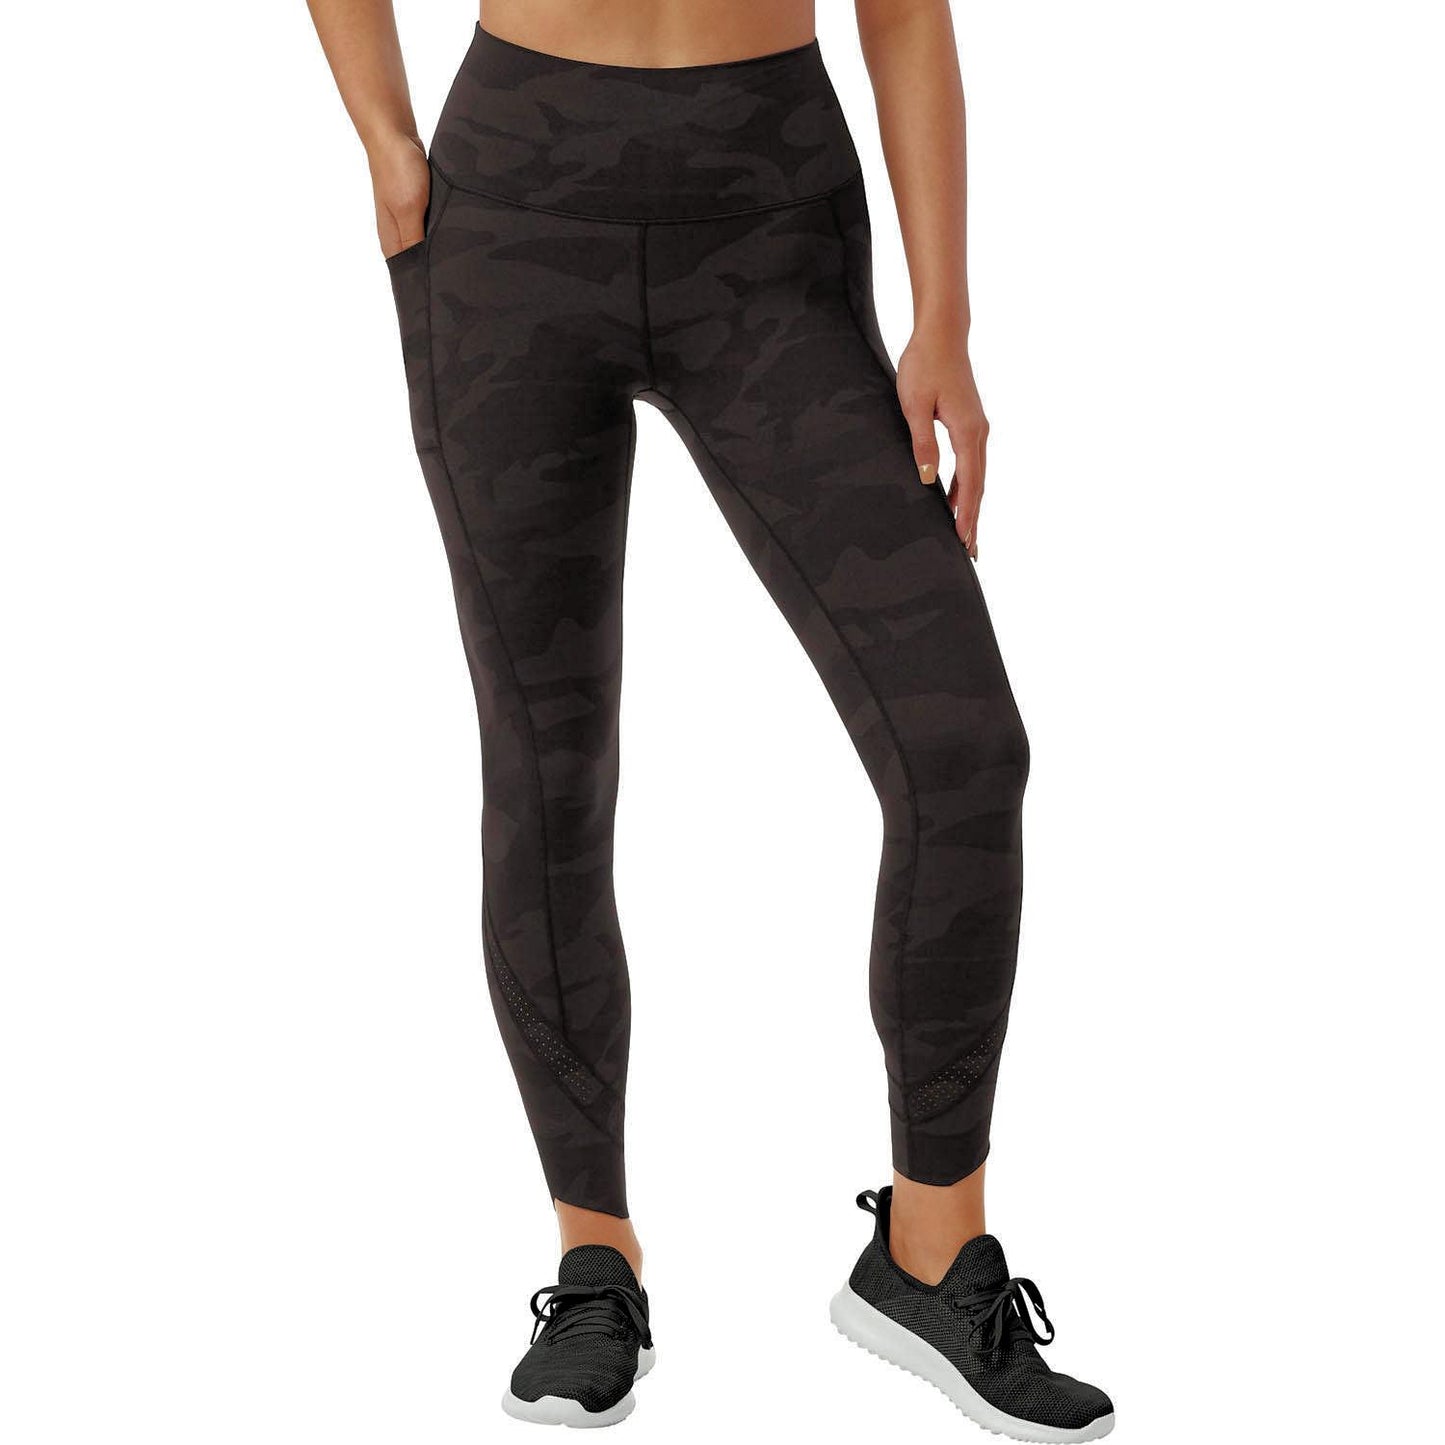 Zen Perforated Printed Hi Rise Ankle Legging with Pockets